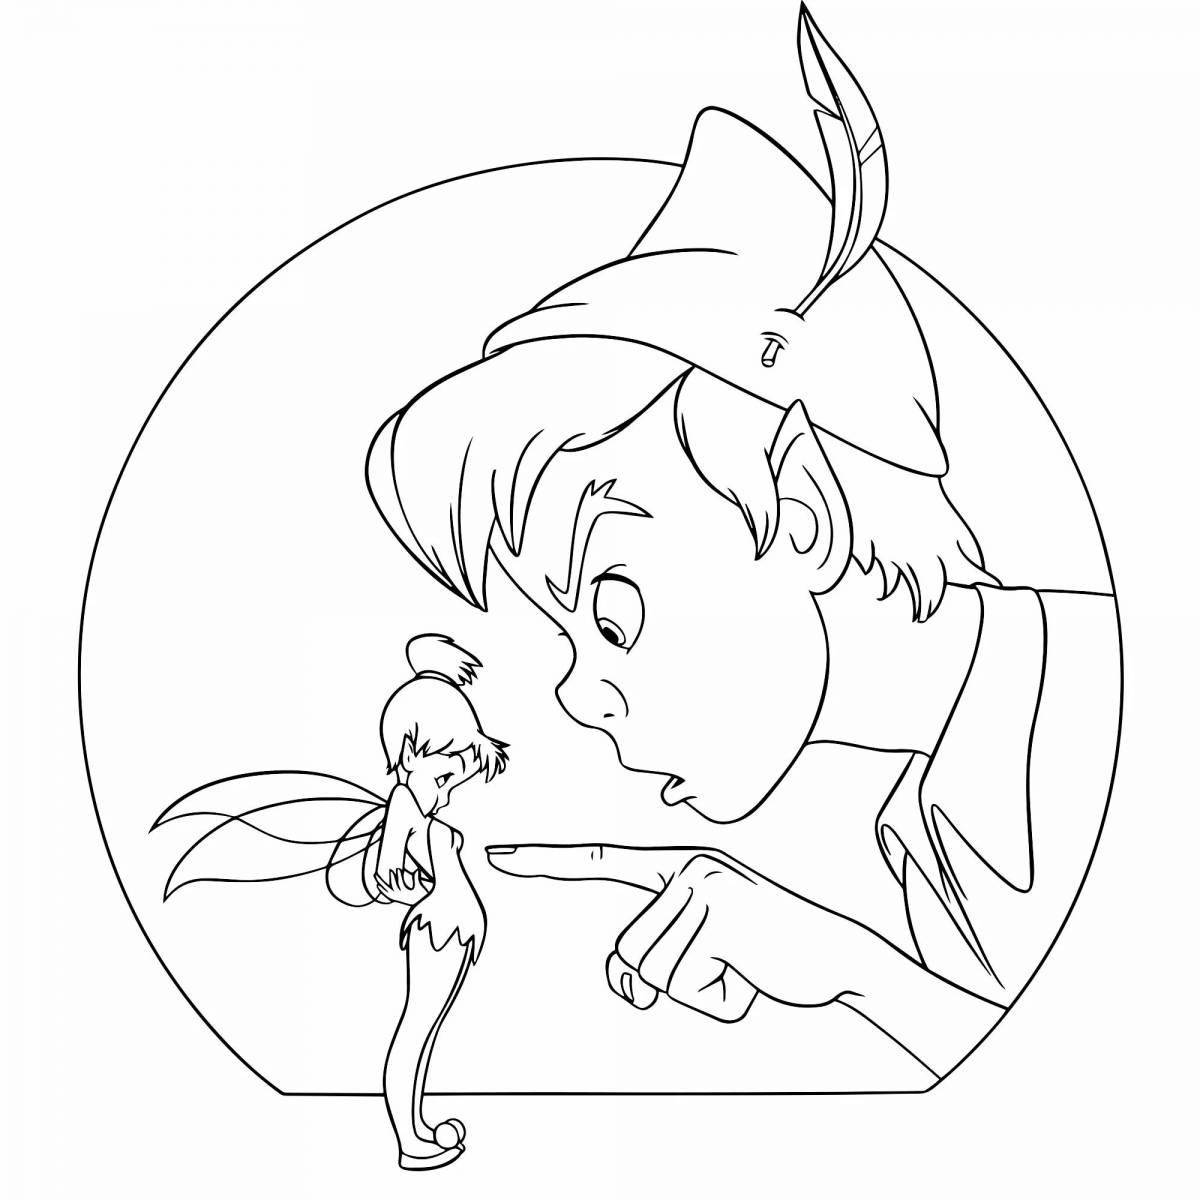 Coloring page adorable peter pan